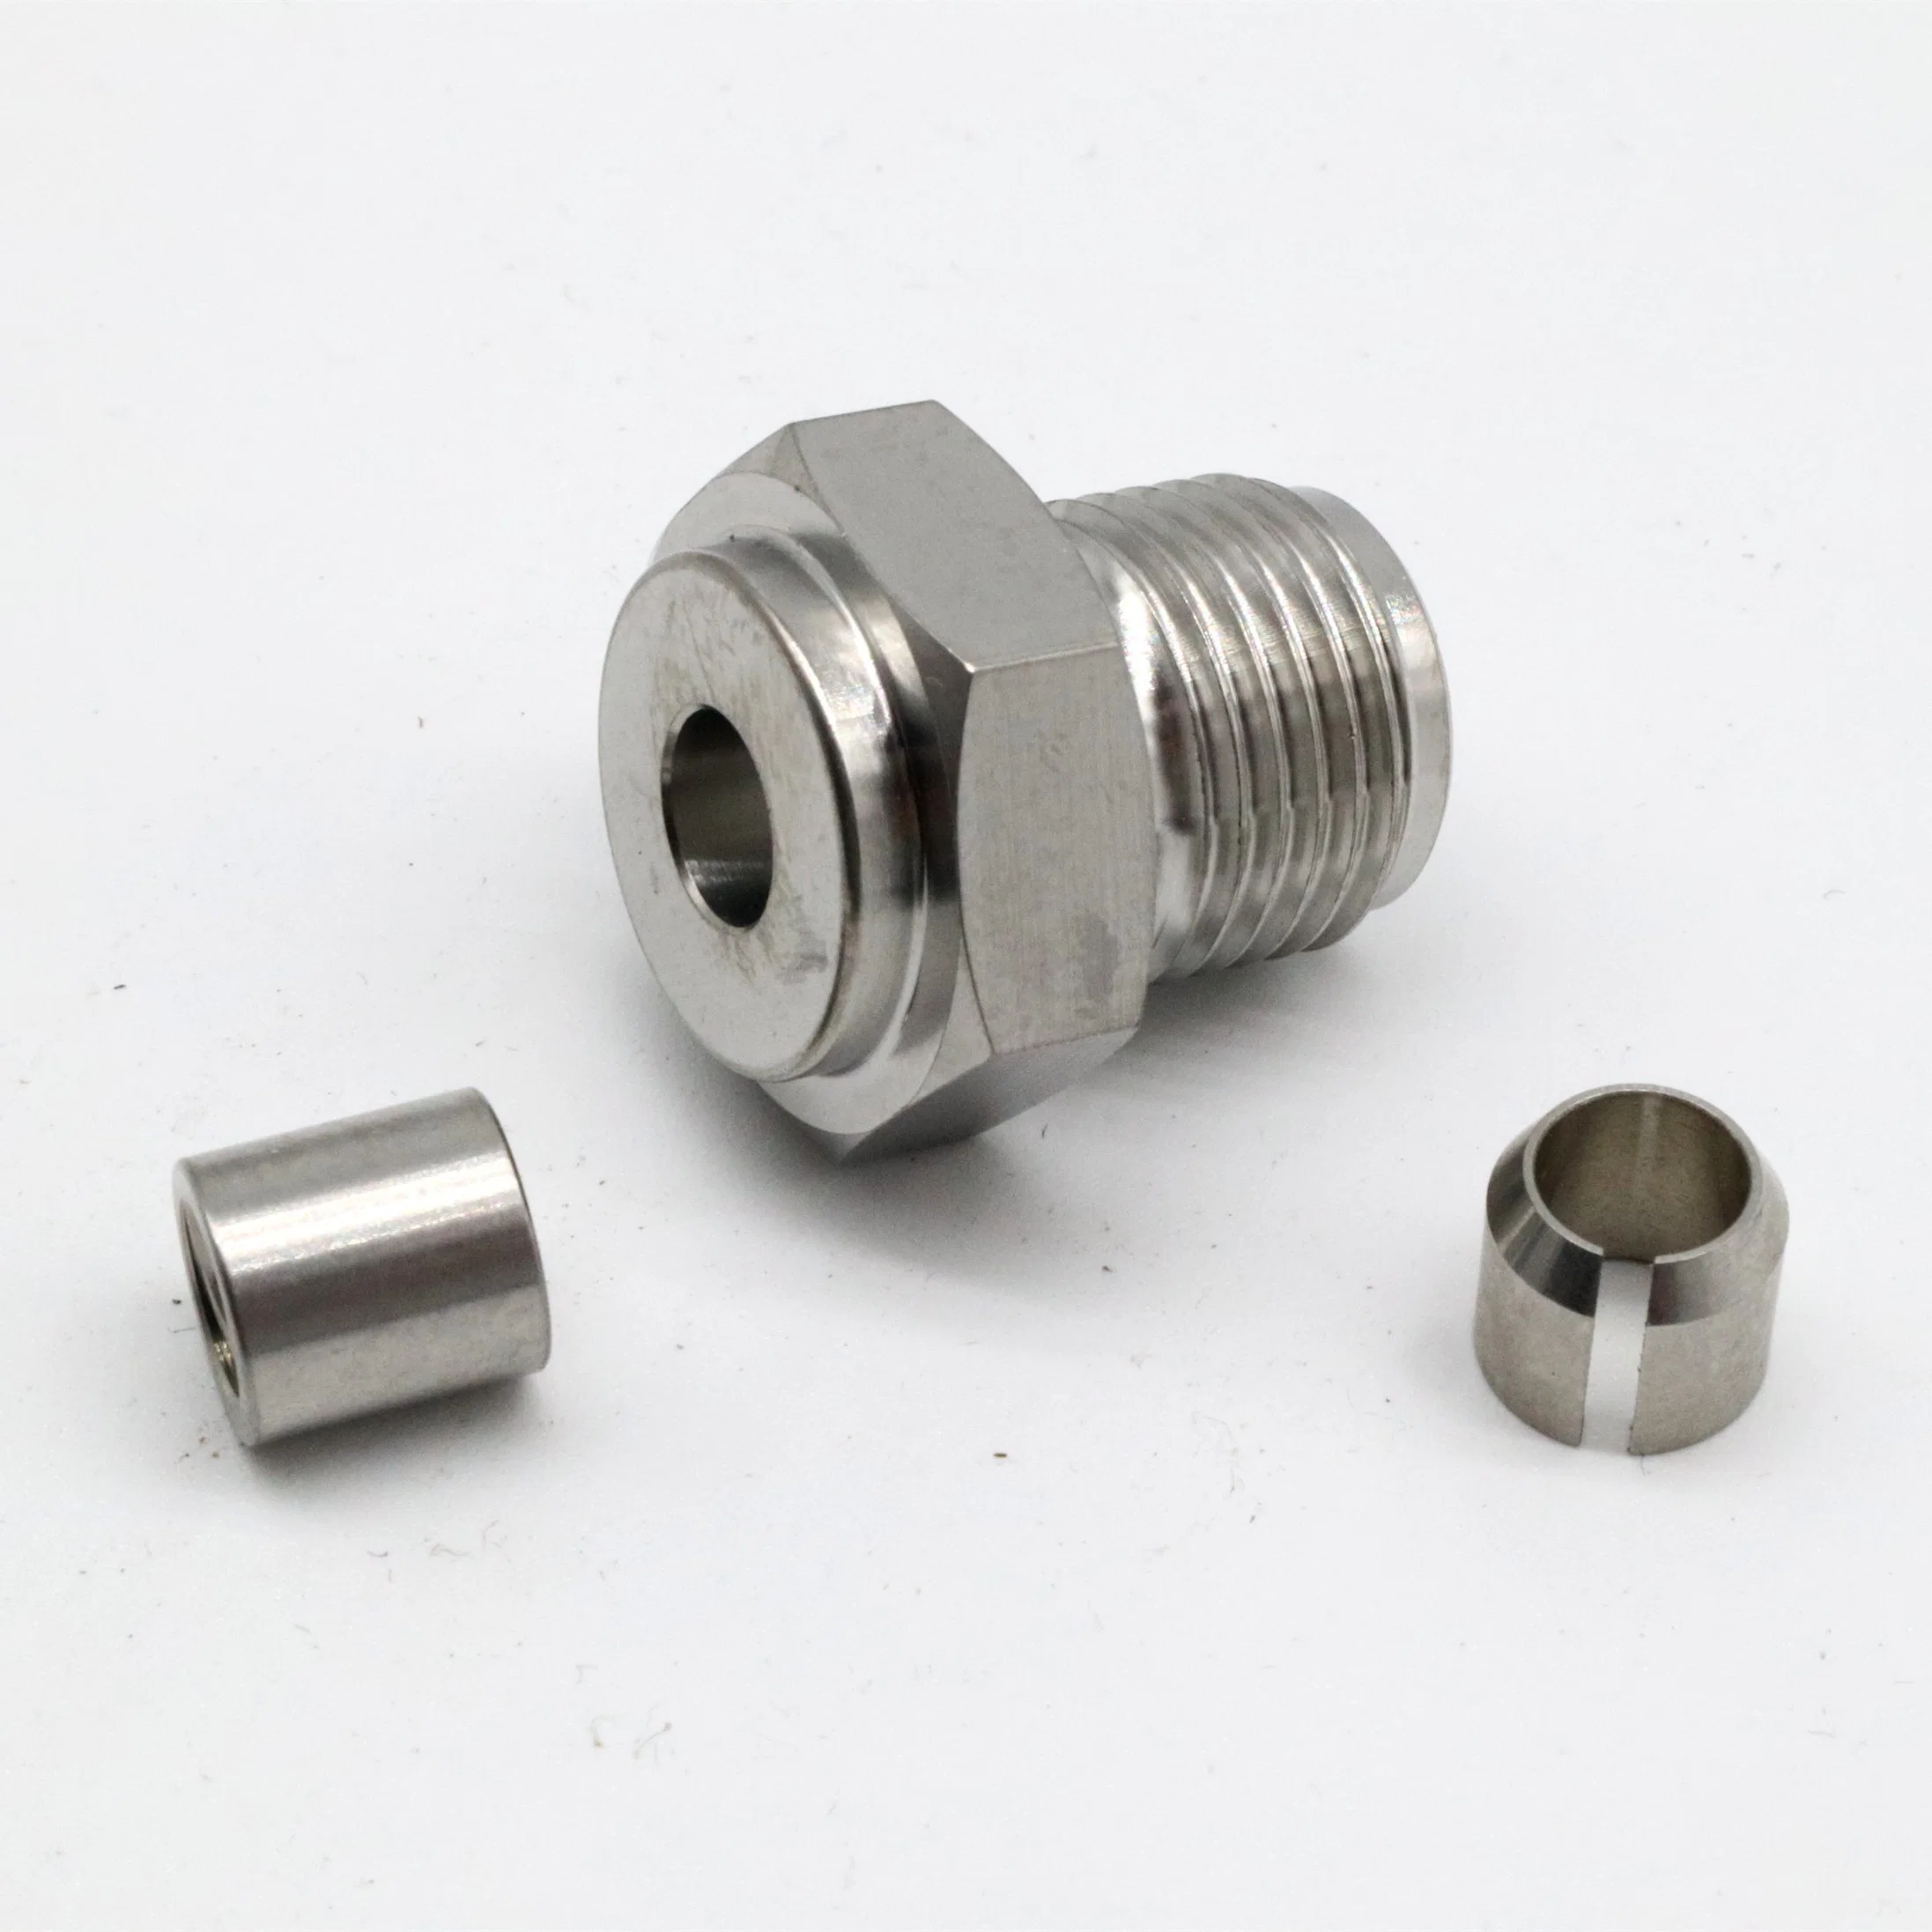 CNC China Top Quality Pipe Fitting 60K Anti Vibration Gland Collar a-0689-1 for High Pressure Waterjet Cutters